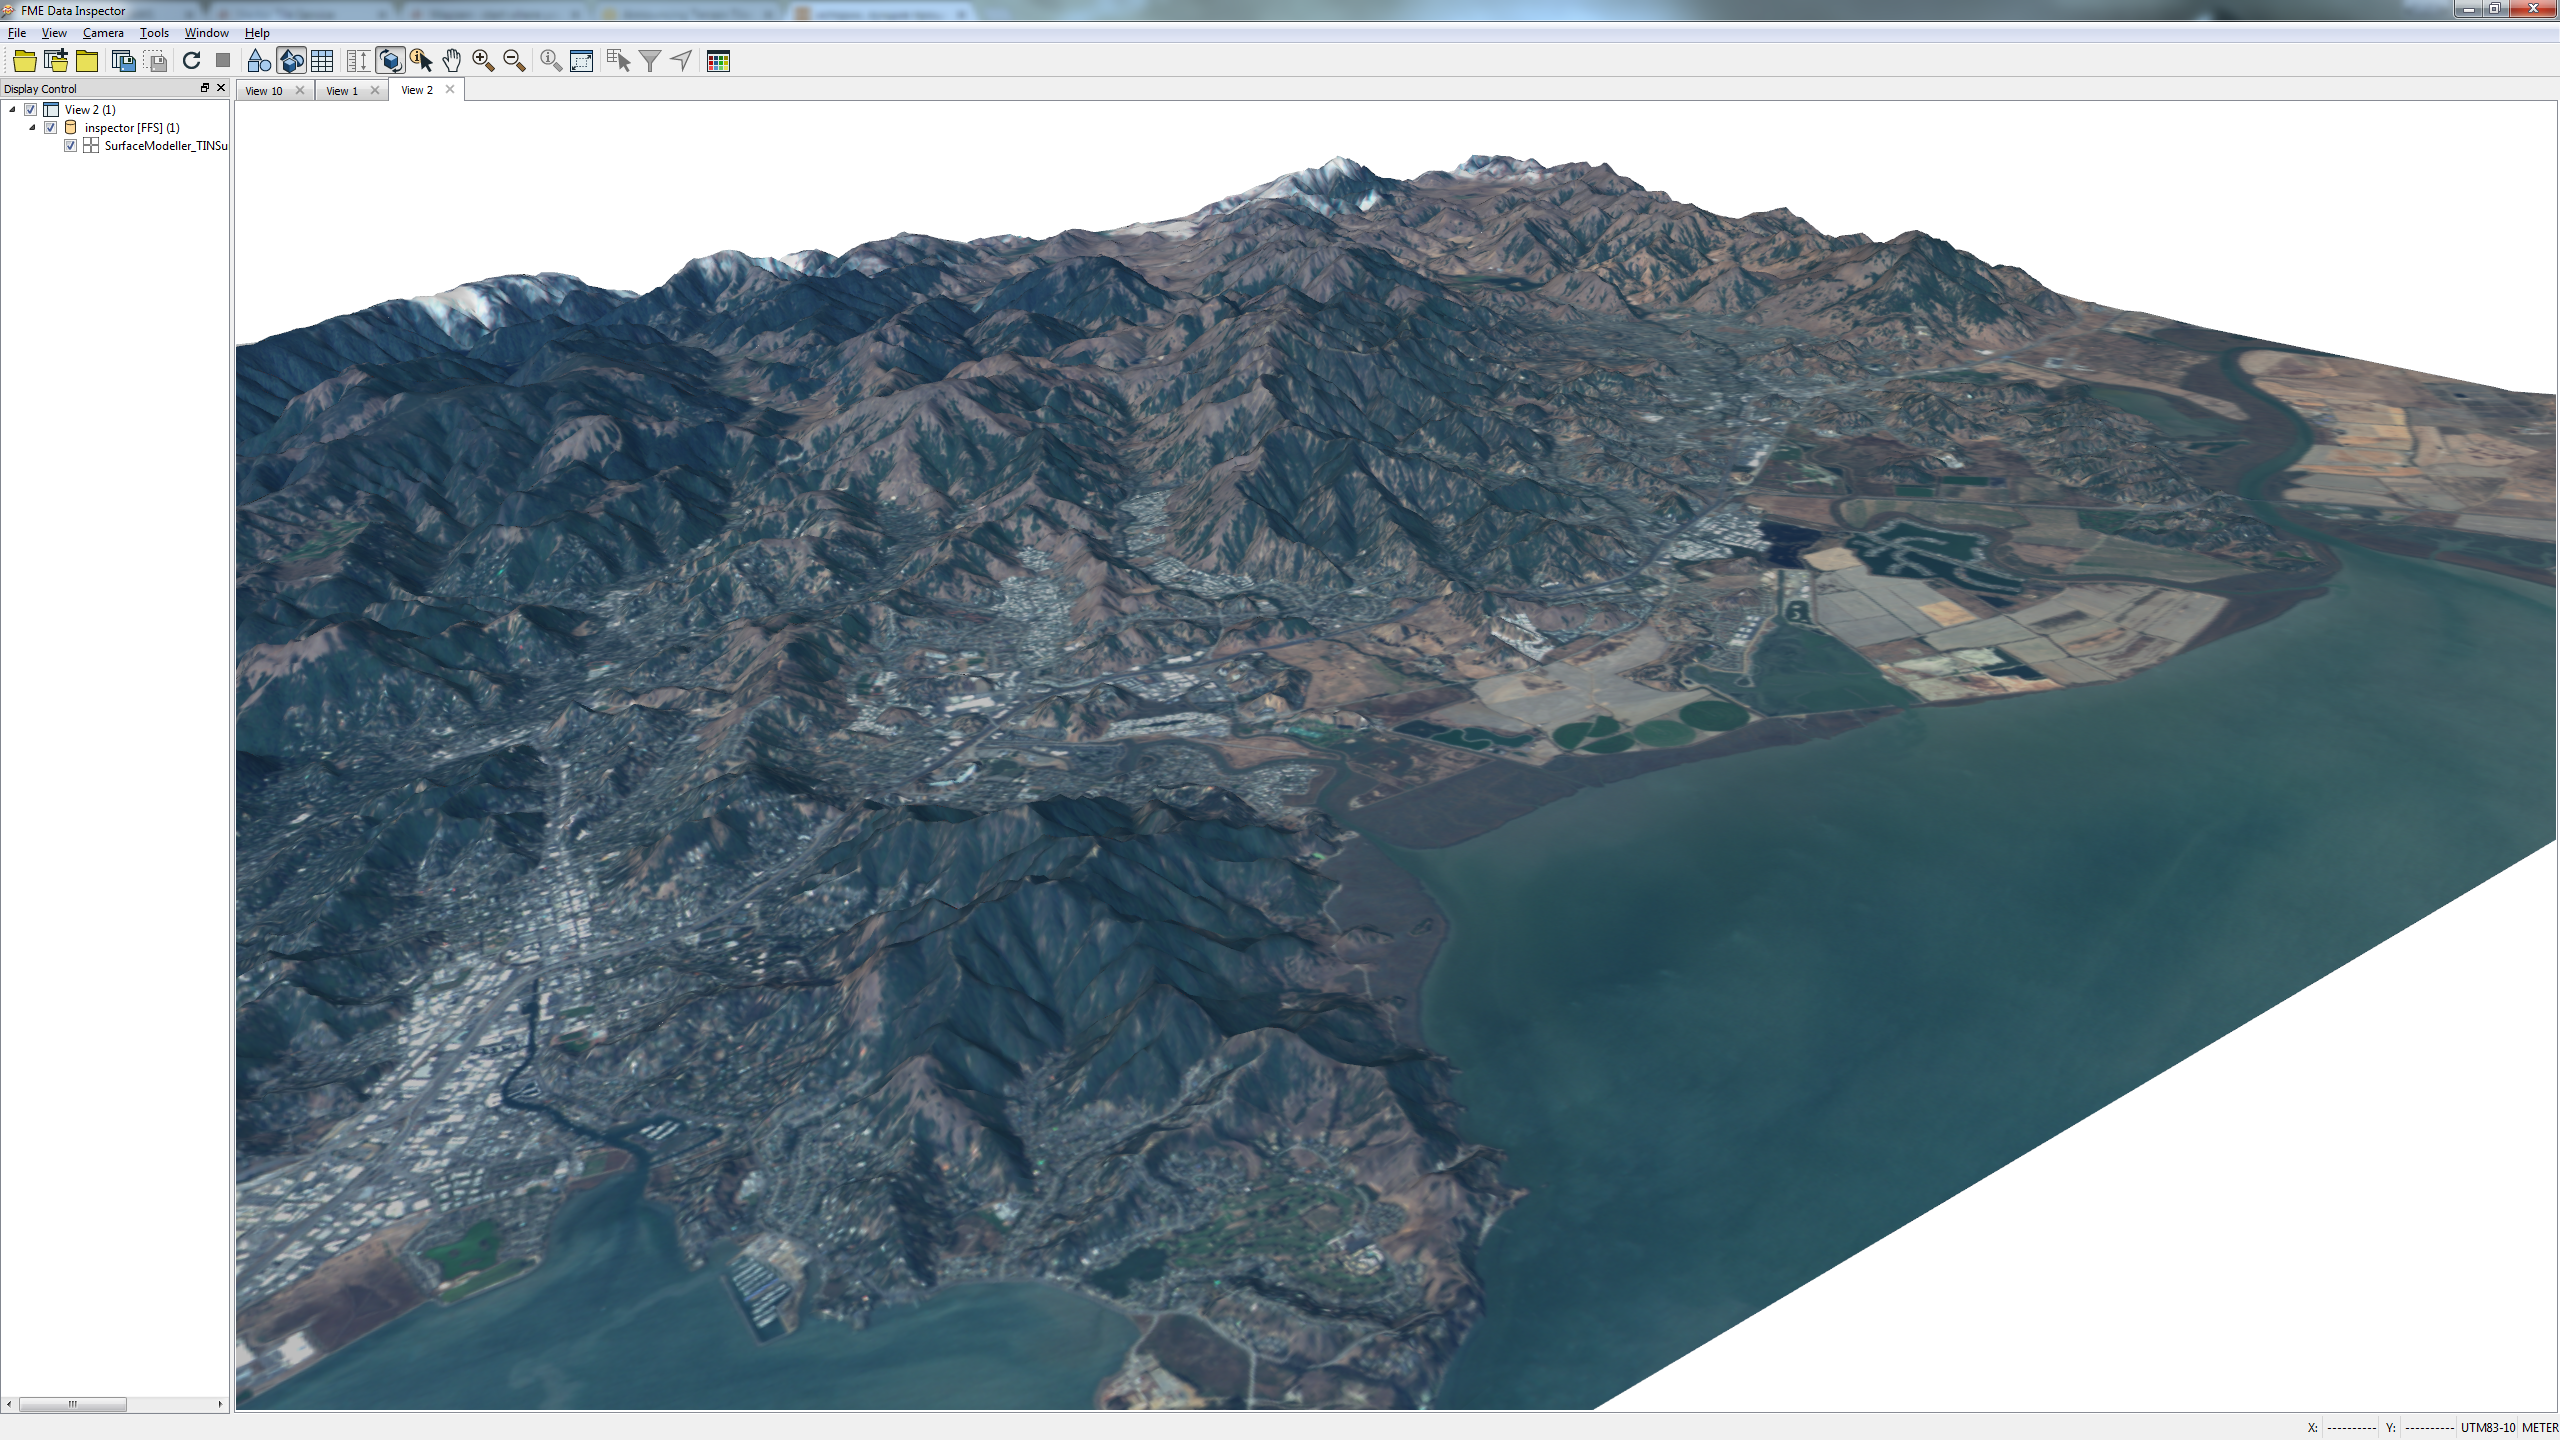 Raster image extruded to 3D, viewed in the FME Data Inspector.